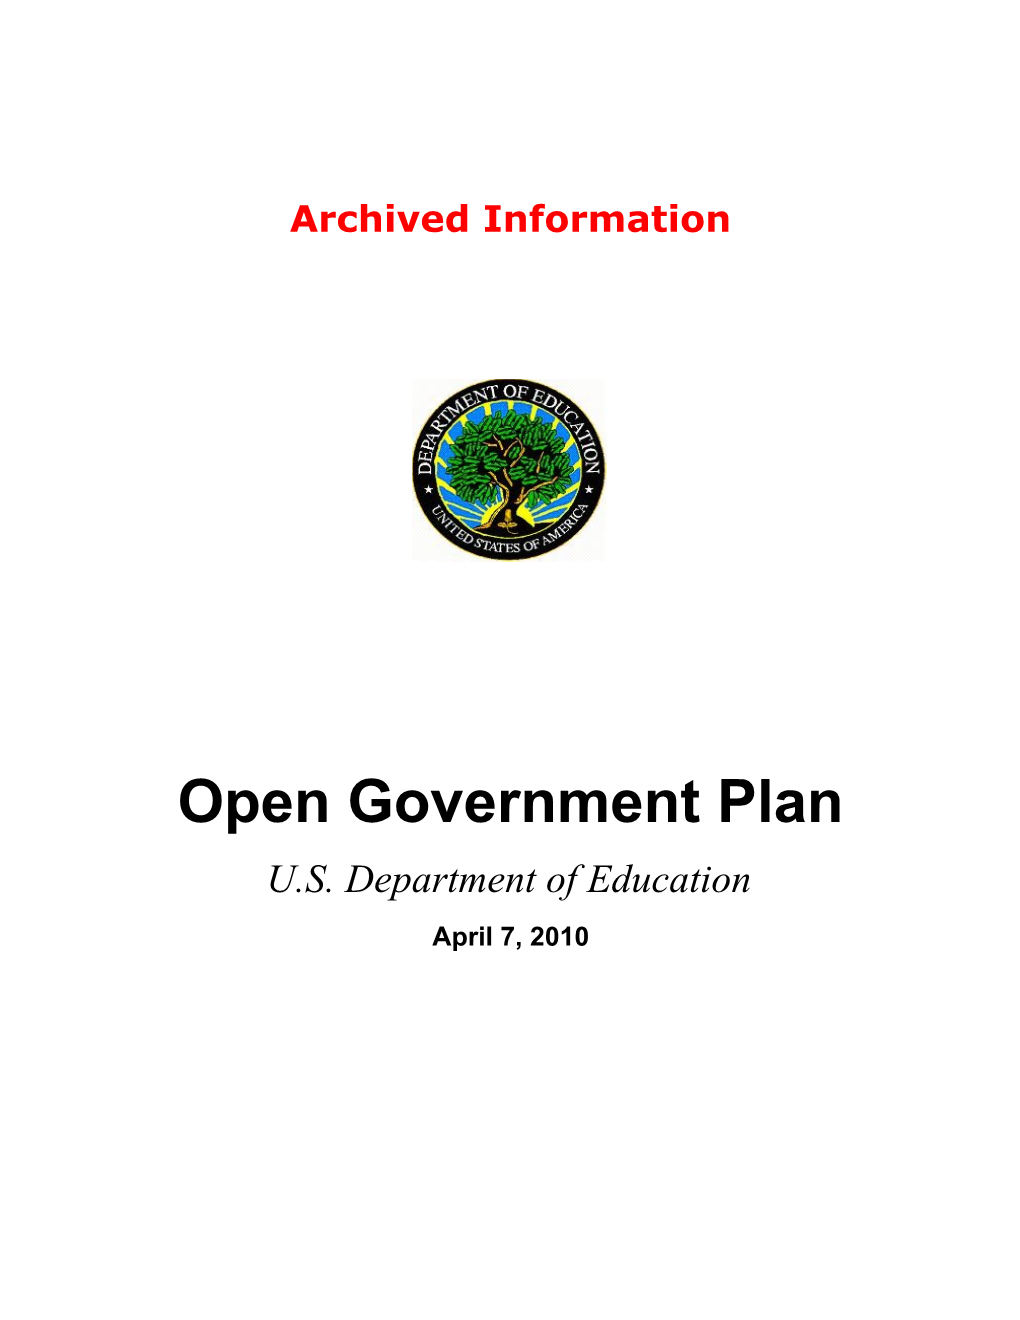 Archived: Open Government Plan, U.S. Department of Education April 23, 2010 (PDF)